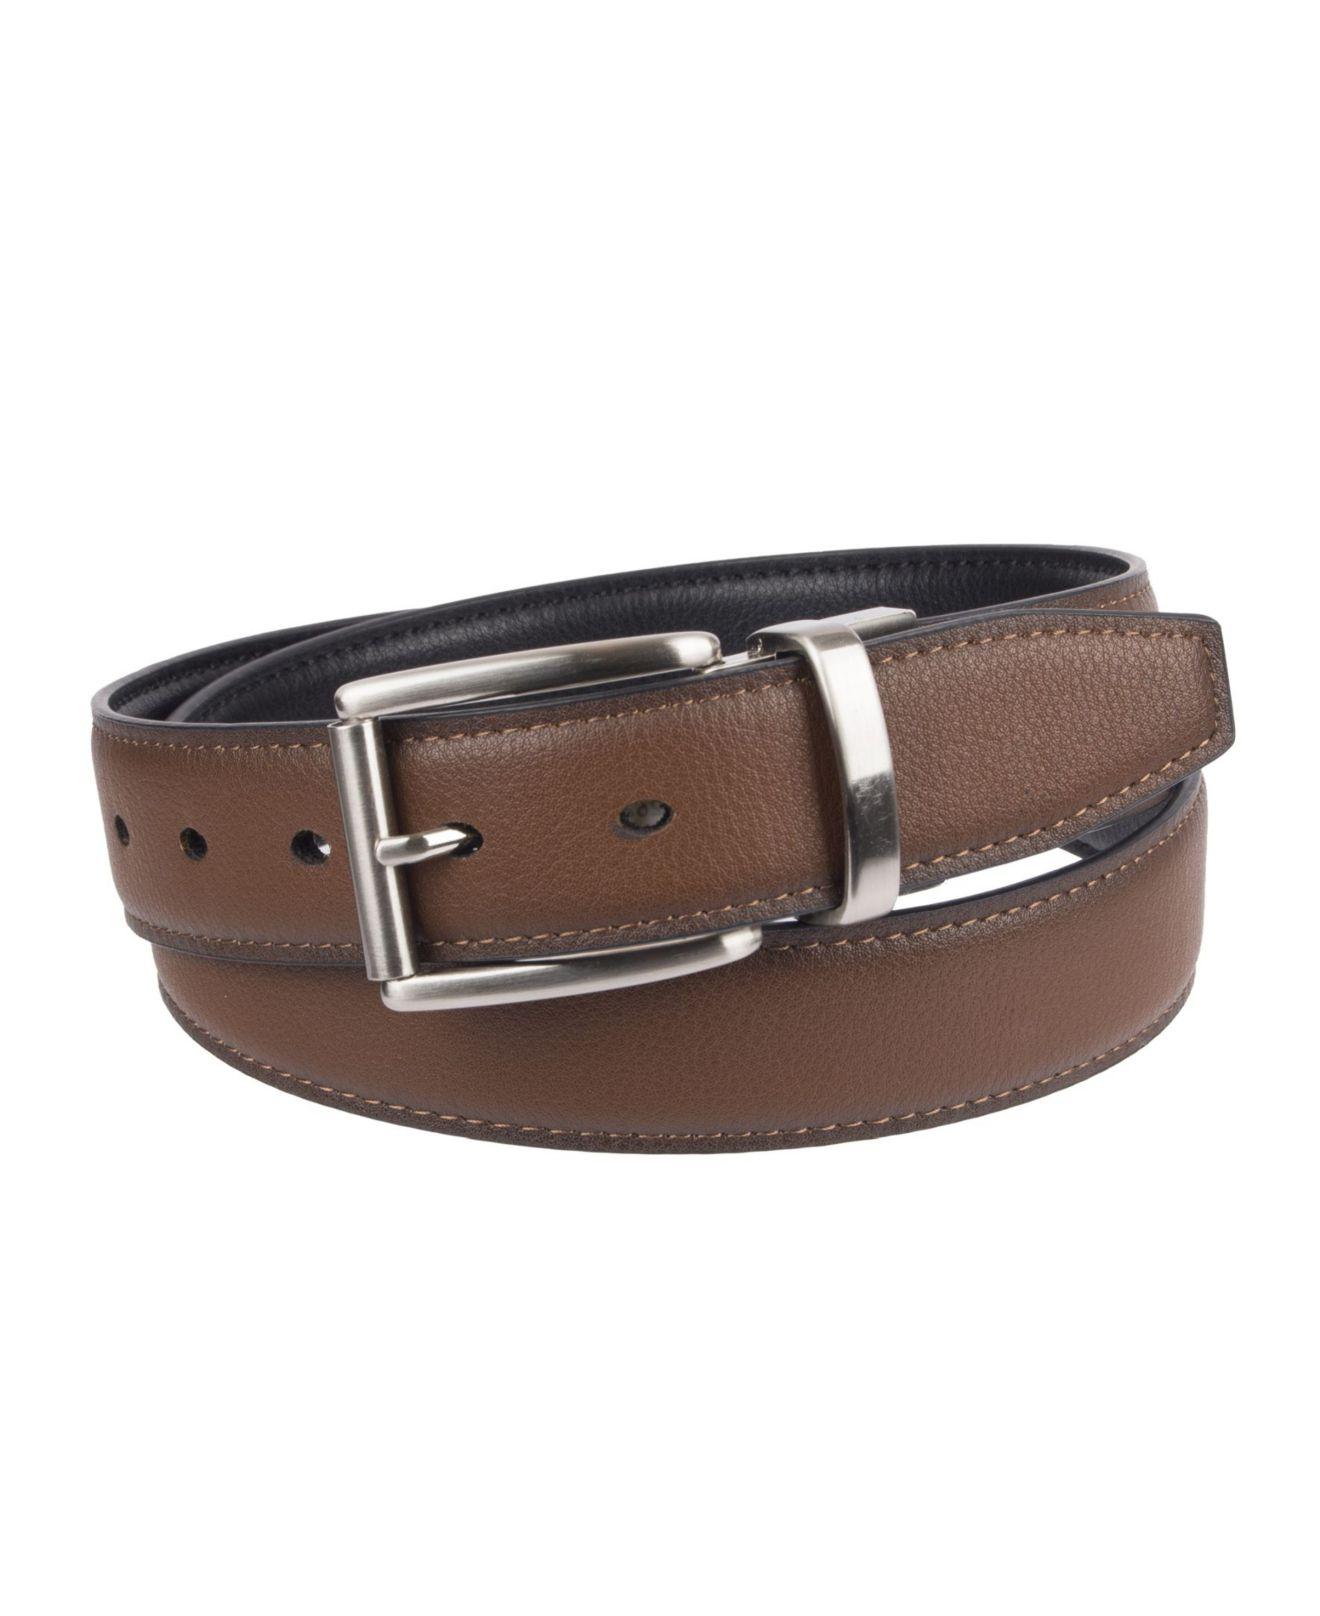 Dockers Leather Belt With Comfort Stretch in Black/Cognac (Black) for ...